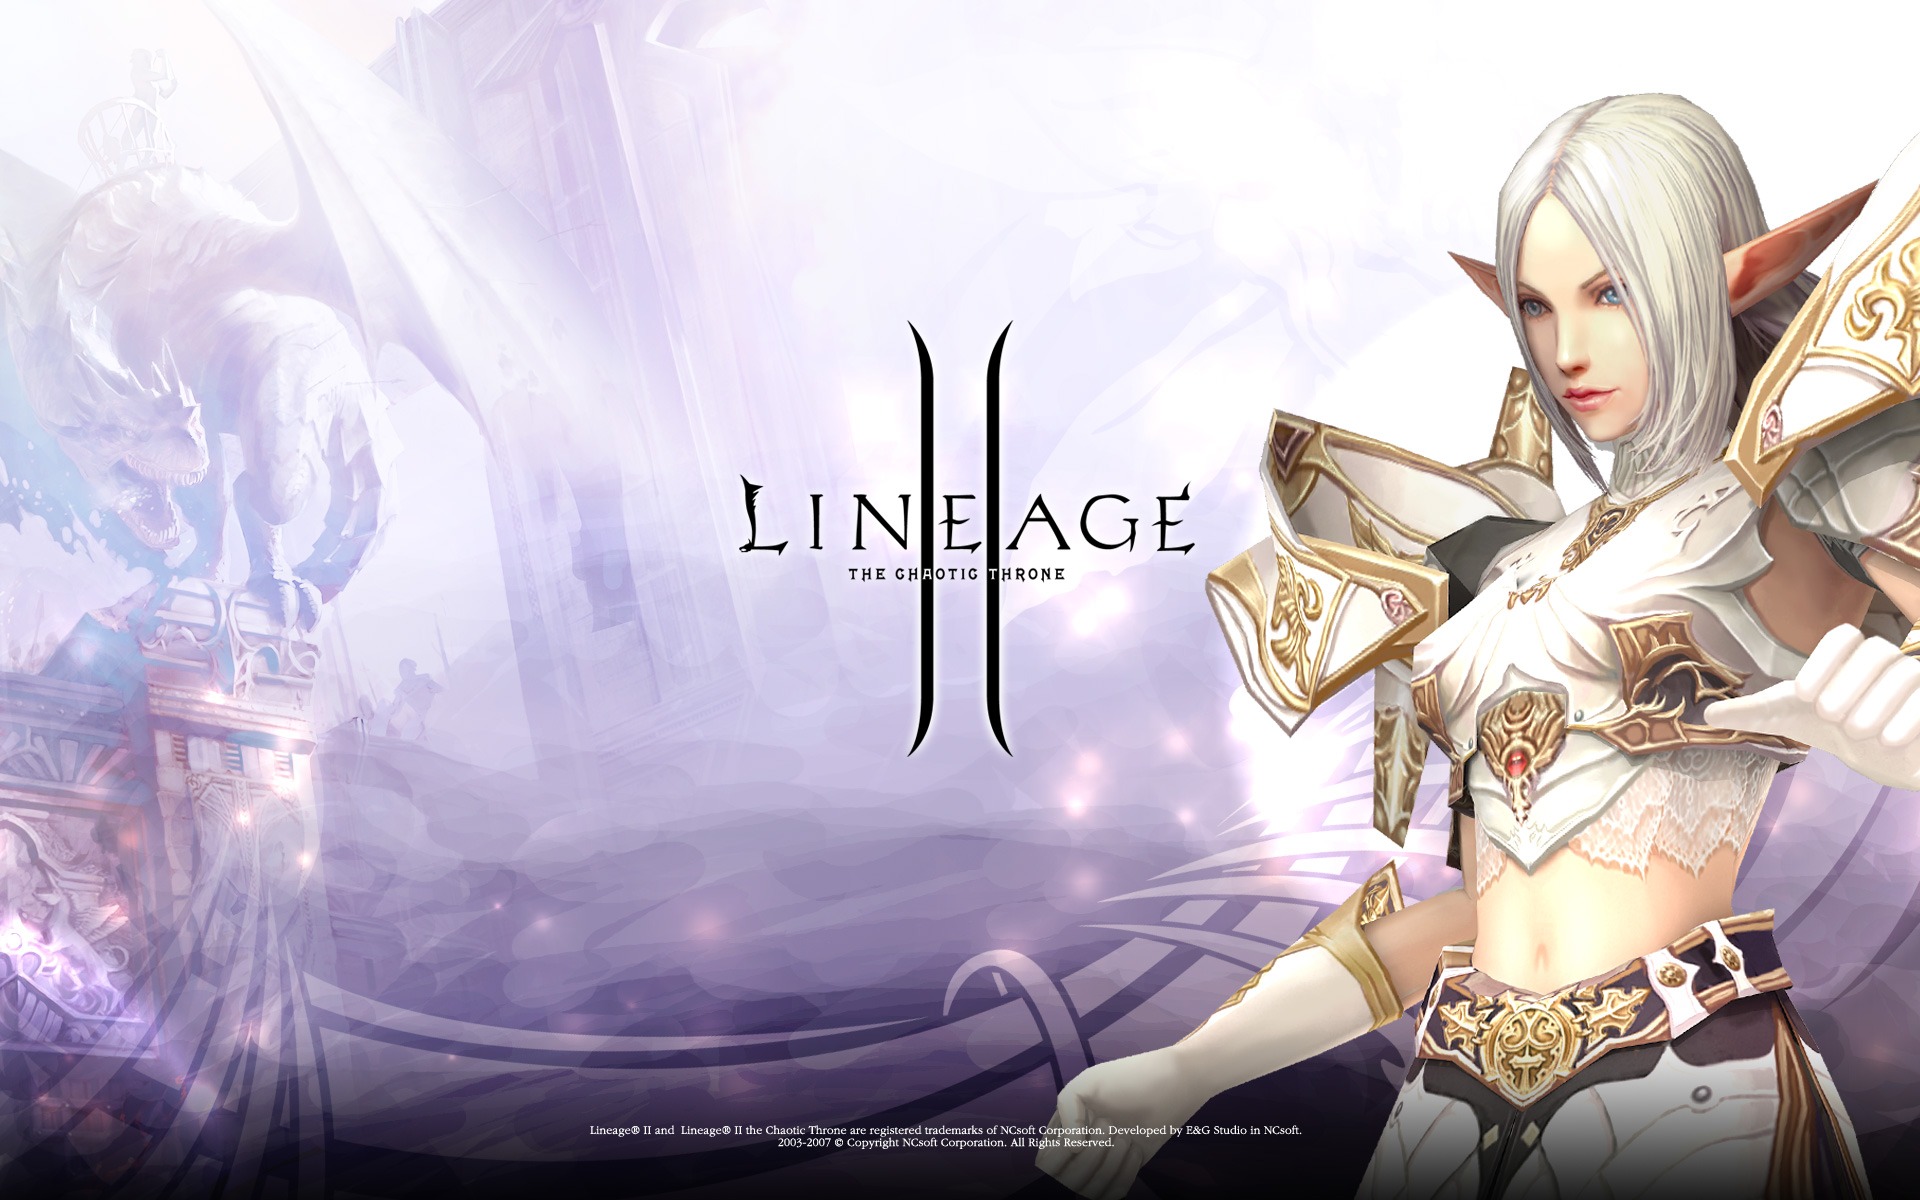 LINEAGE Ⅱ modeling HD gaming wallpapers #16 - 1920x1200